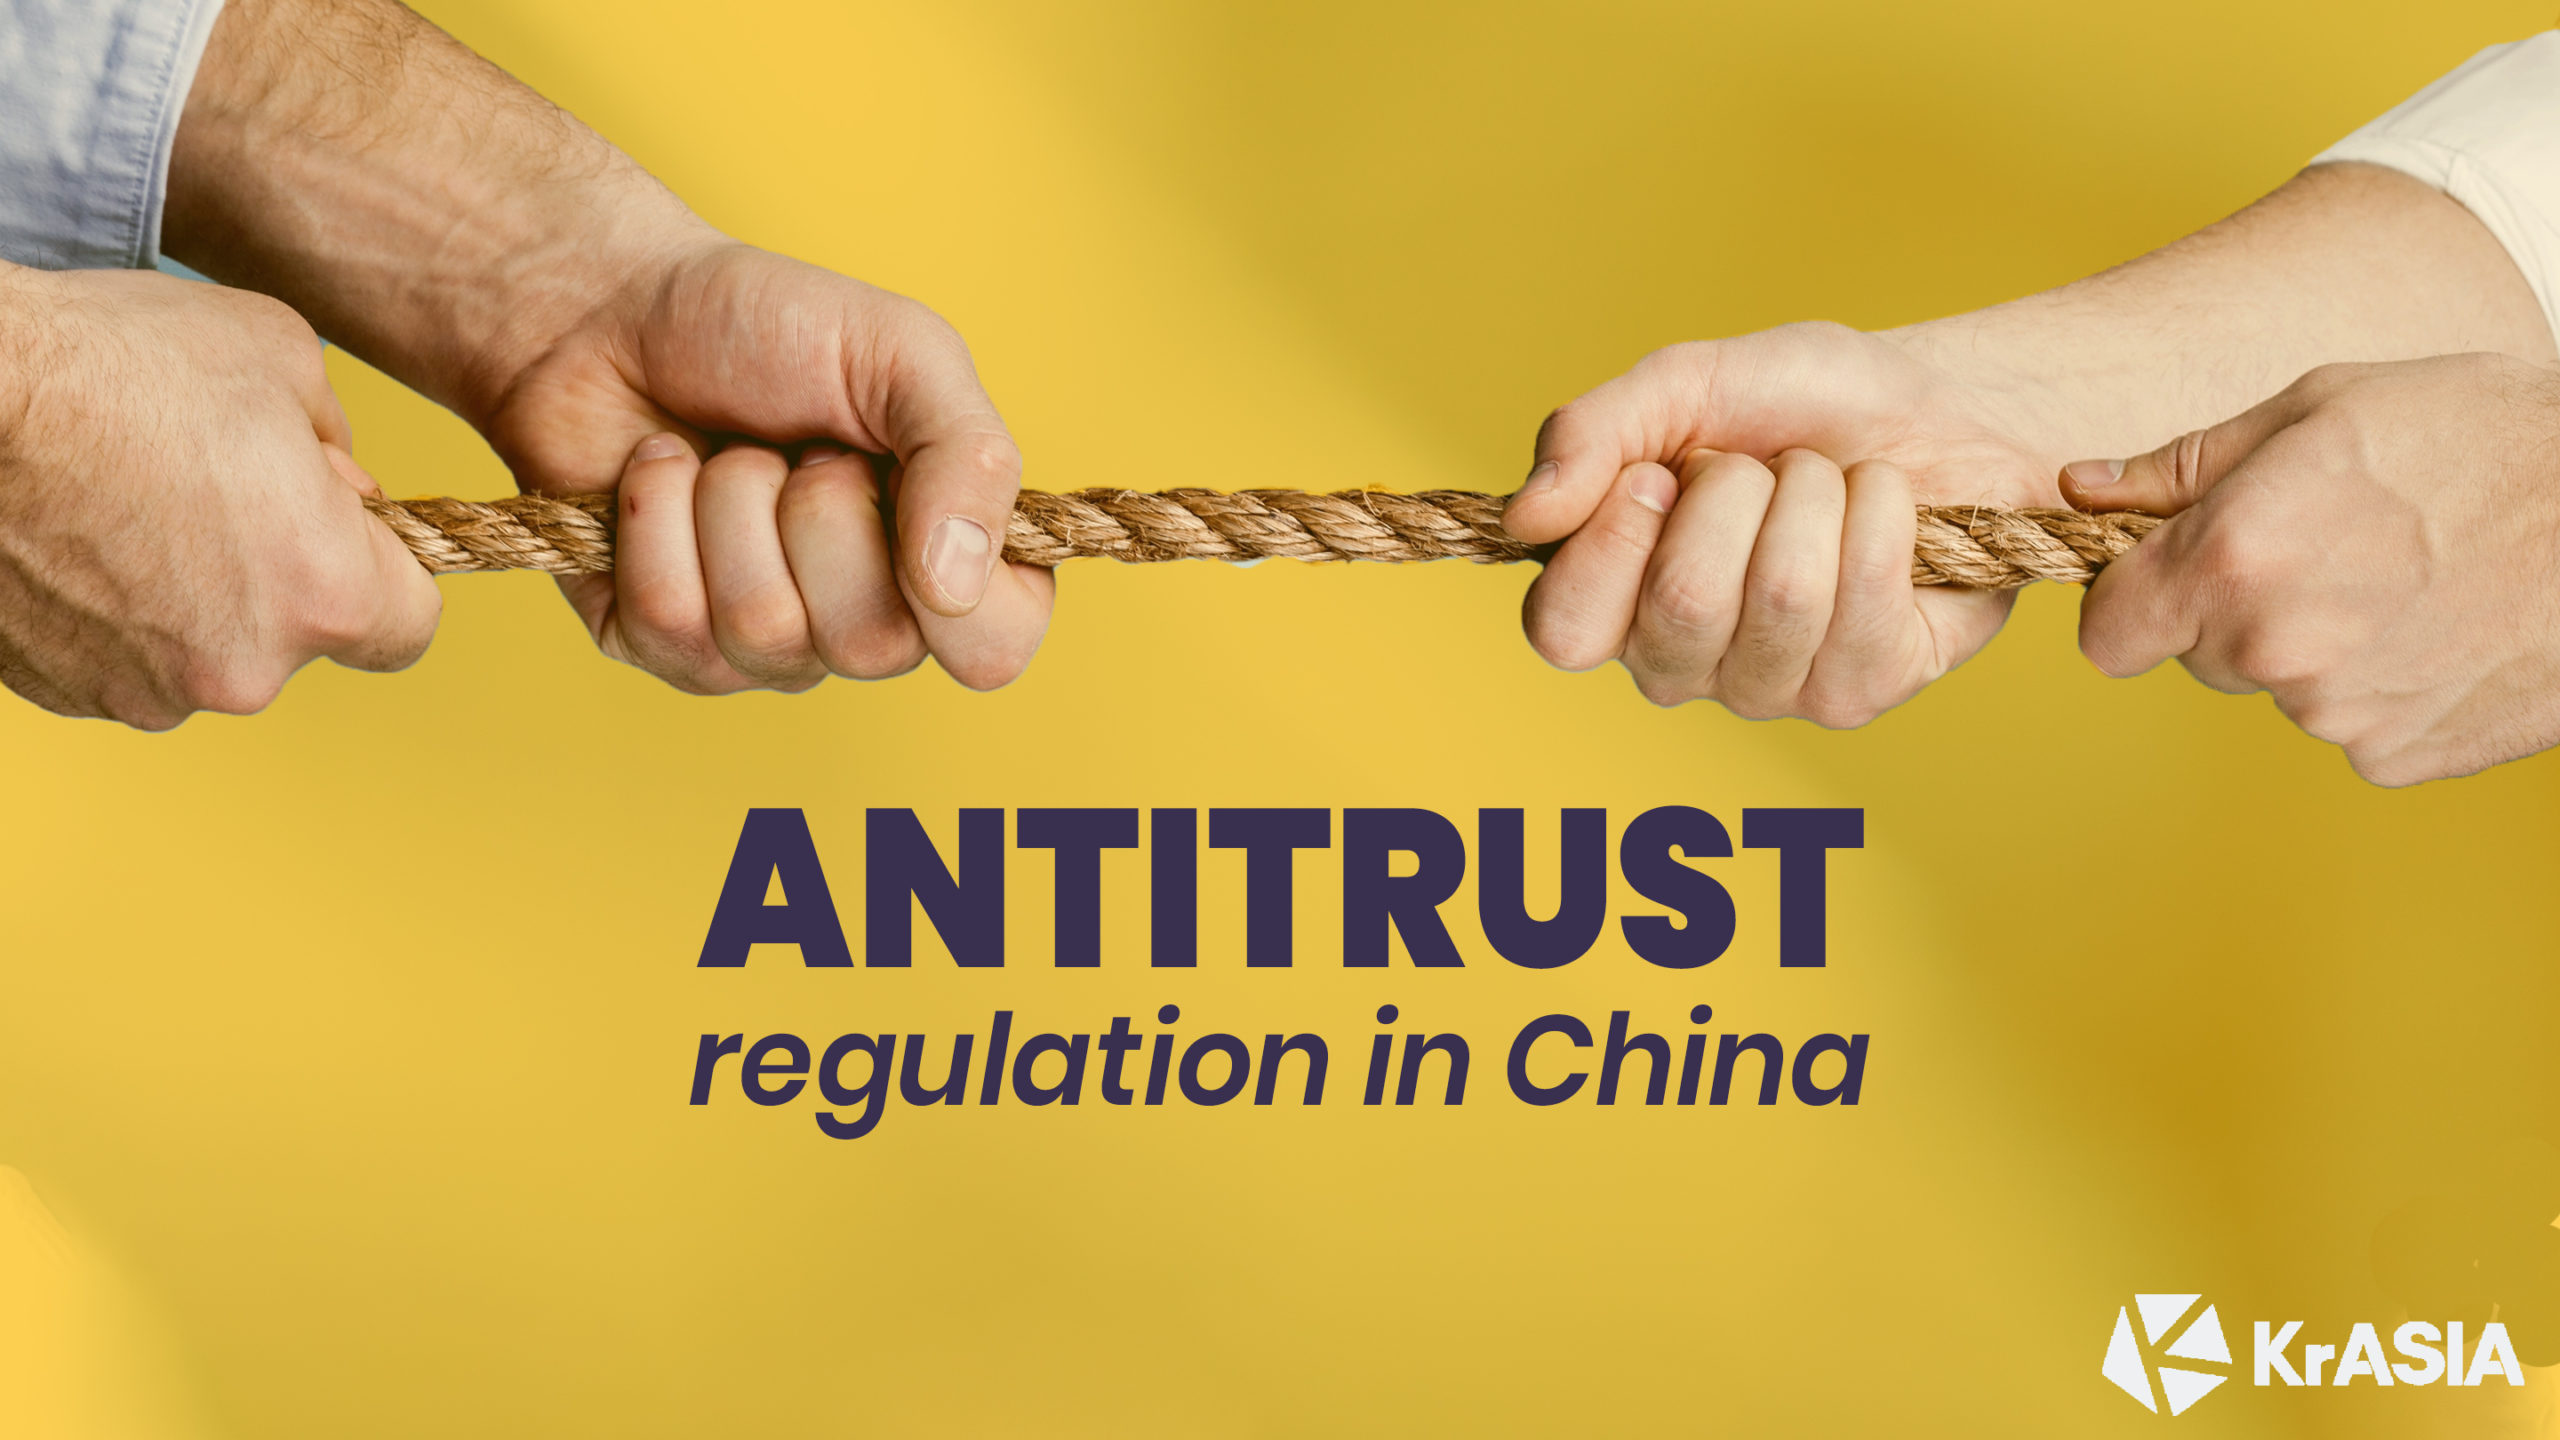 China’s new antitrust rules rein in sprawling marketplace platforms